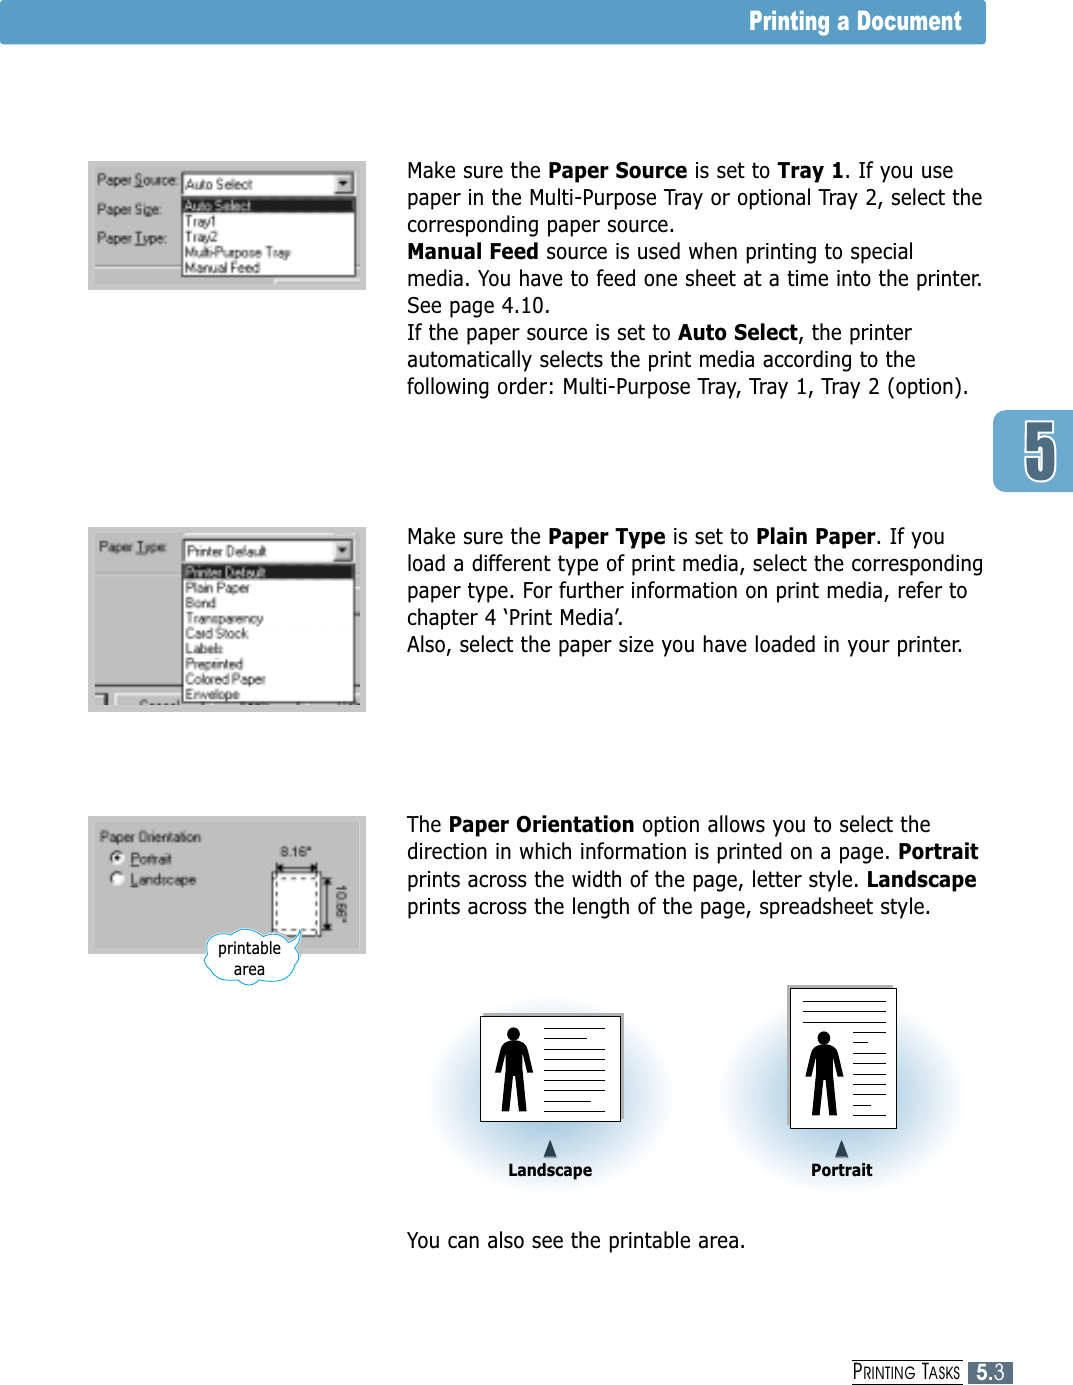 5.3PRINTING TASKSPrinting a DocumentMake sure the Paper Source is set to Tray 1. If you usepaper in the Multi-Purpose Tray or optional Tray 2, select thecorresponding paper source. Manual Feed source is used when printing to specialmedia. You have to feed one sheet at a time into the printer.See page 4.10.If the paper source is set to Auto Select, the printerautomatically selects the print media according to thefollowing order: Multi-Purpose Tray, Tray 1, Tray 2 (option).Make sure the Paper Type is set to Plain Paper. If youload a different type of print media, select the correspondingpaper type. For further information on print media, refer tochapter 4 ‘Print Media’. Also, select the paper size you have loaded in your printer.The Paper Orientation option allows you to select thedirection in which information is printed on a page. Portraitprints across the width of the page, letter style. Landscapeprints across the length of the page, spreadsheet style.You can also see the printable area.➐➐➐➐Landscape➐➐➐➐Portraitprintable area